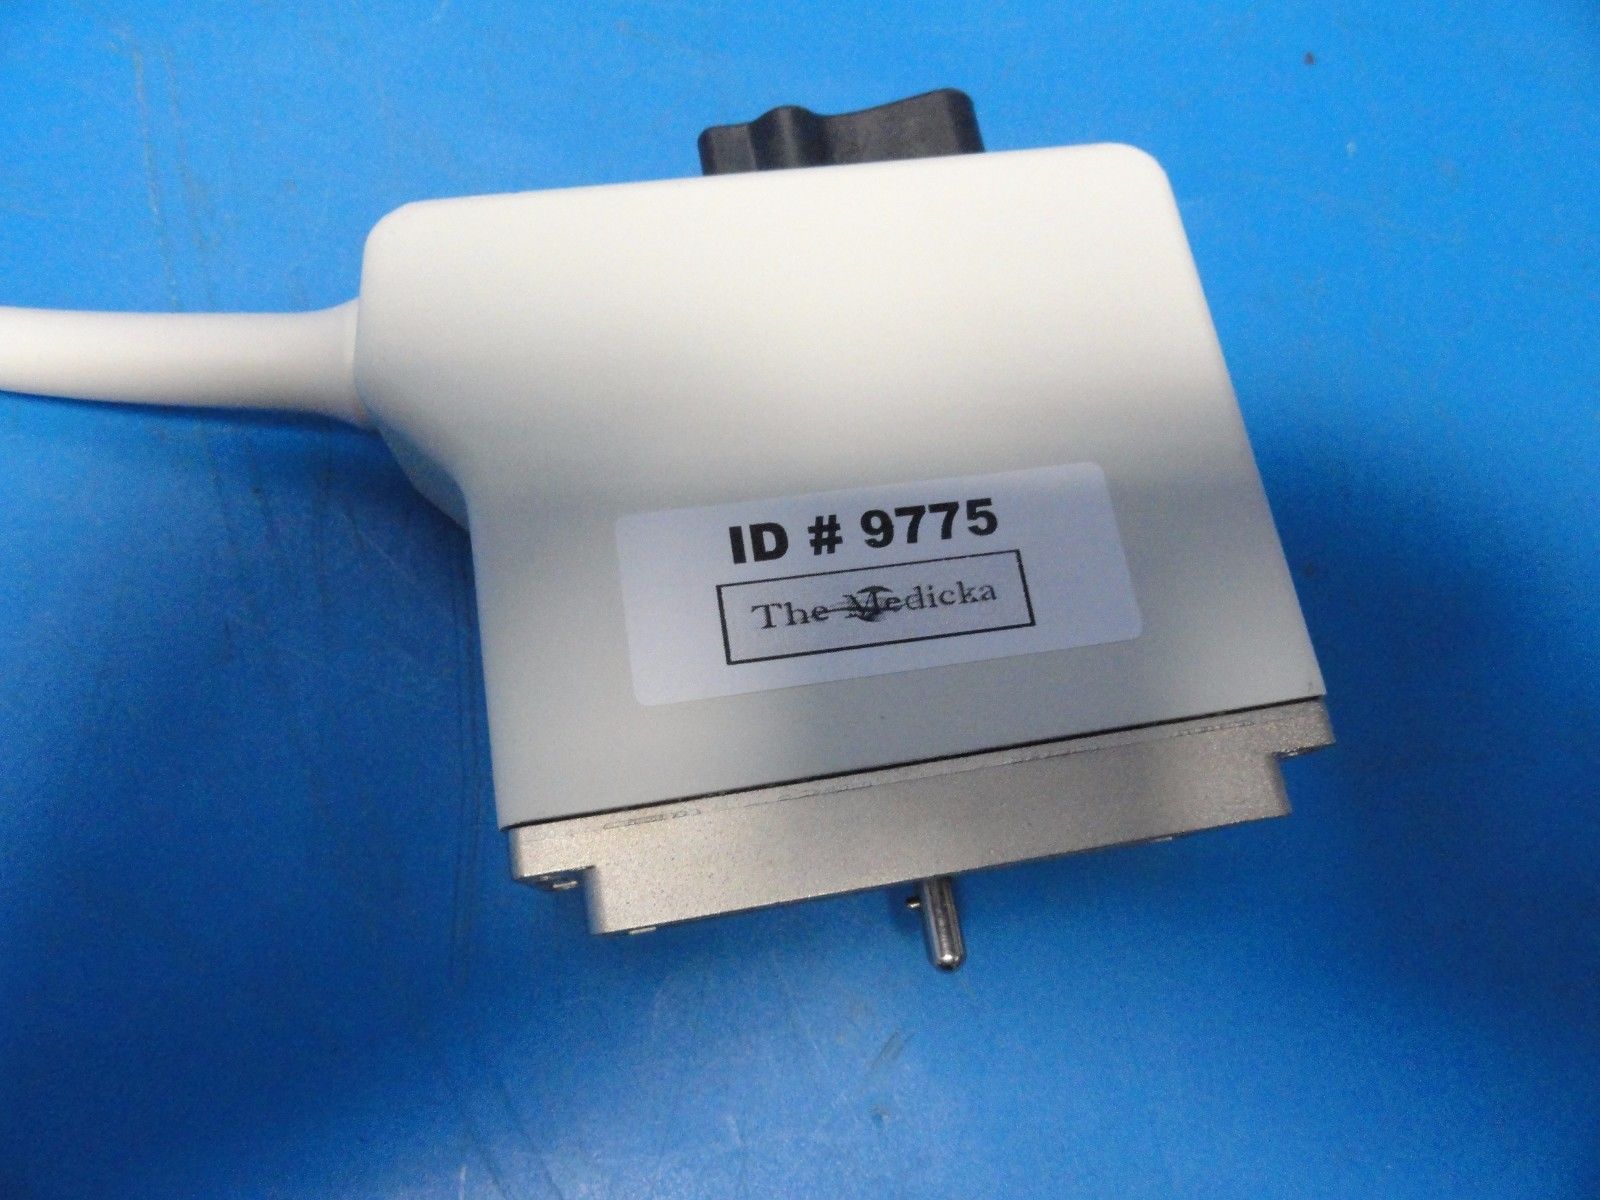 2003 GE Vingmed KN100001 FPA 5MHZ 1A Flat Phased Array Probe for System 5 (9775 DIAGNOSTIC ULTRASOUND MACHINES FOR SALE